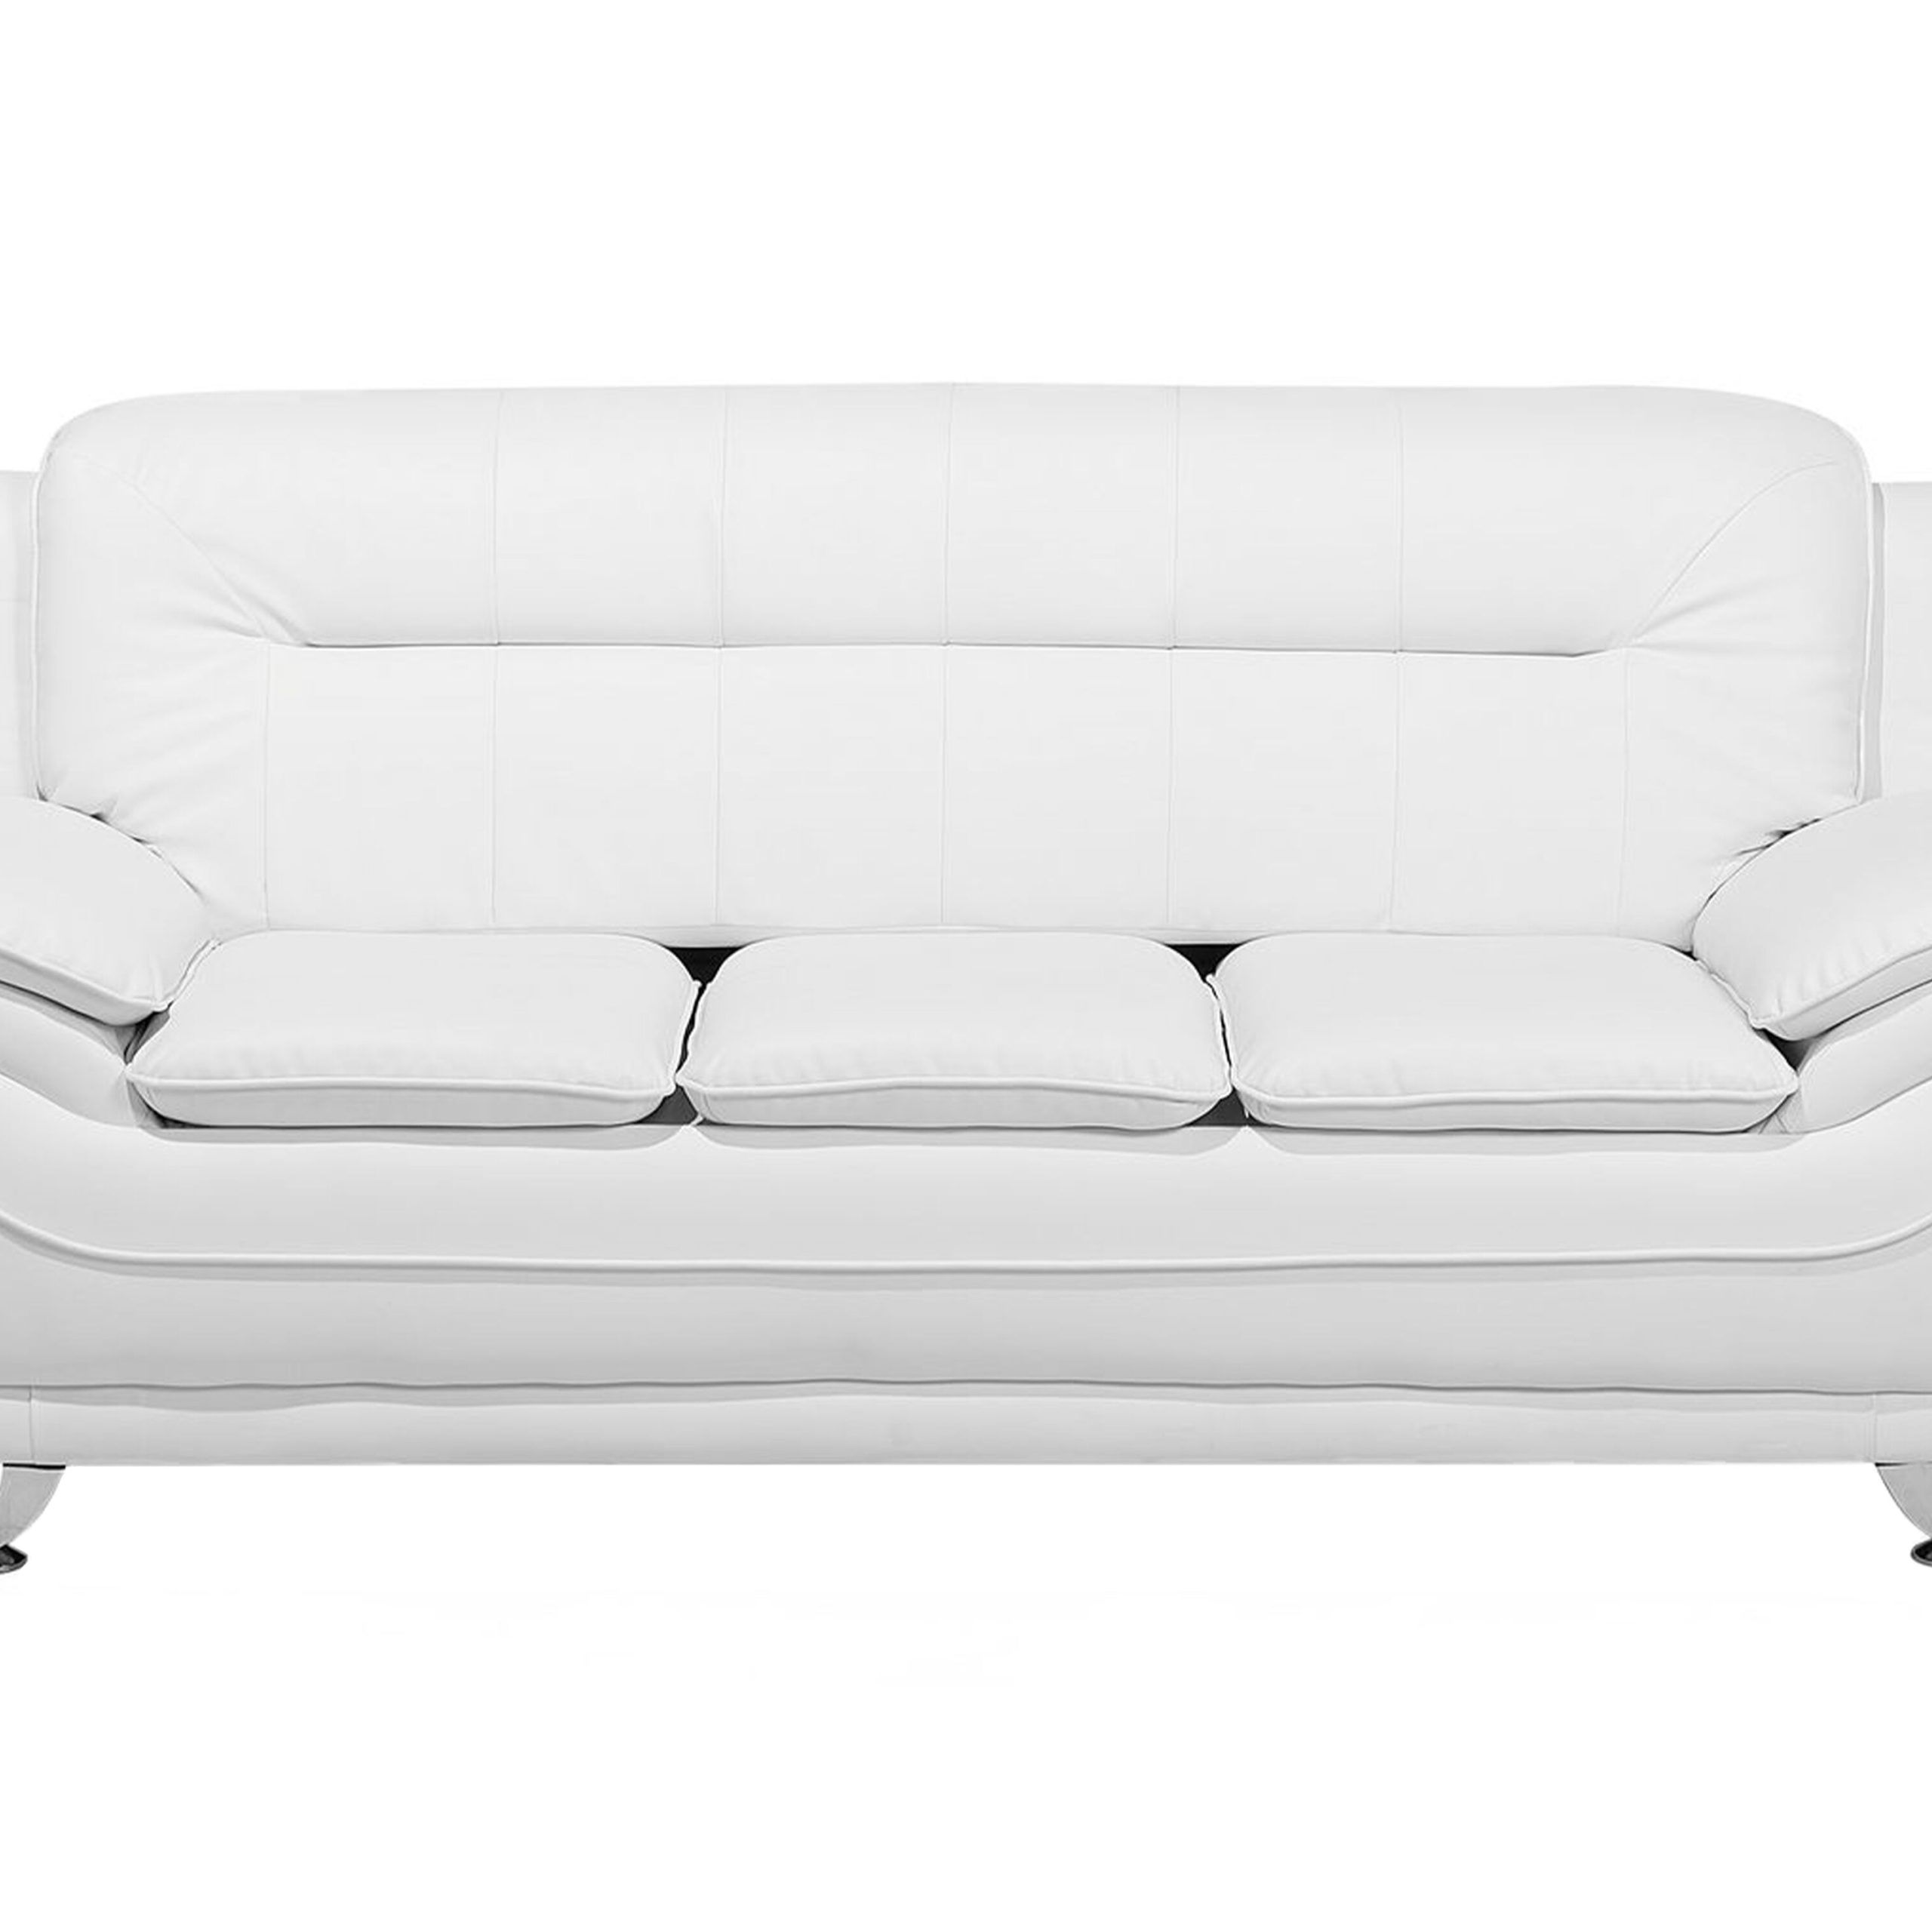 3 Seater Faux Leather Sofa White Leira | Beliani.co.uk Throughout Traditional 3 Seater Faux Leather Sofas (Gallery 13 of 20)